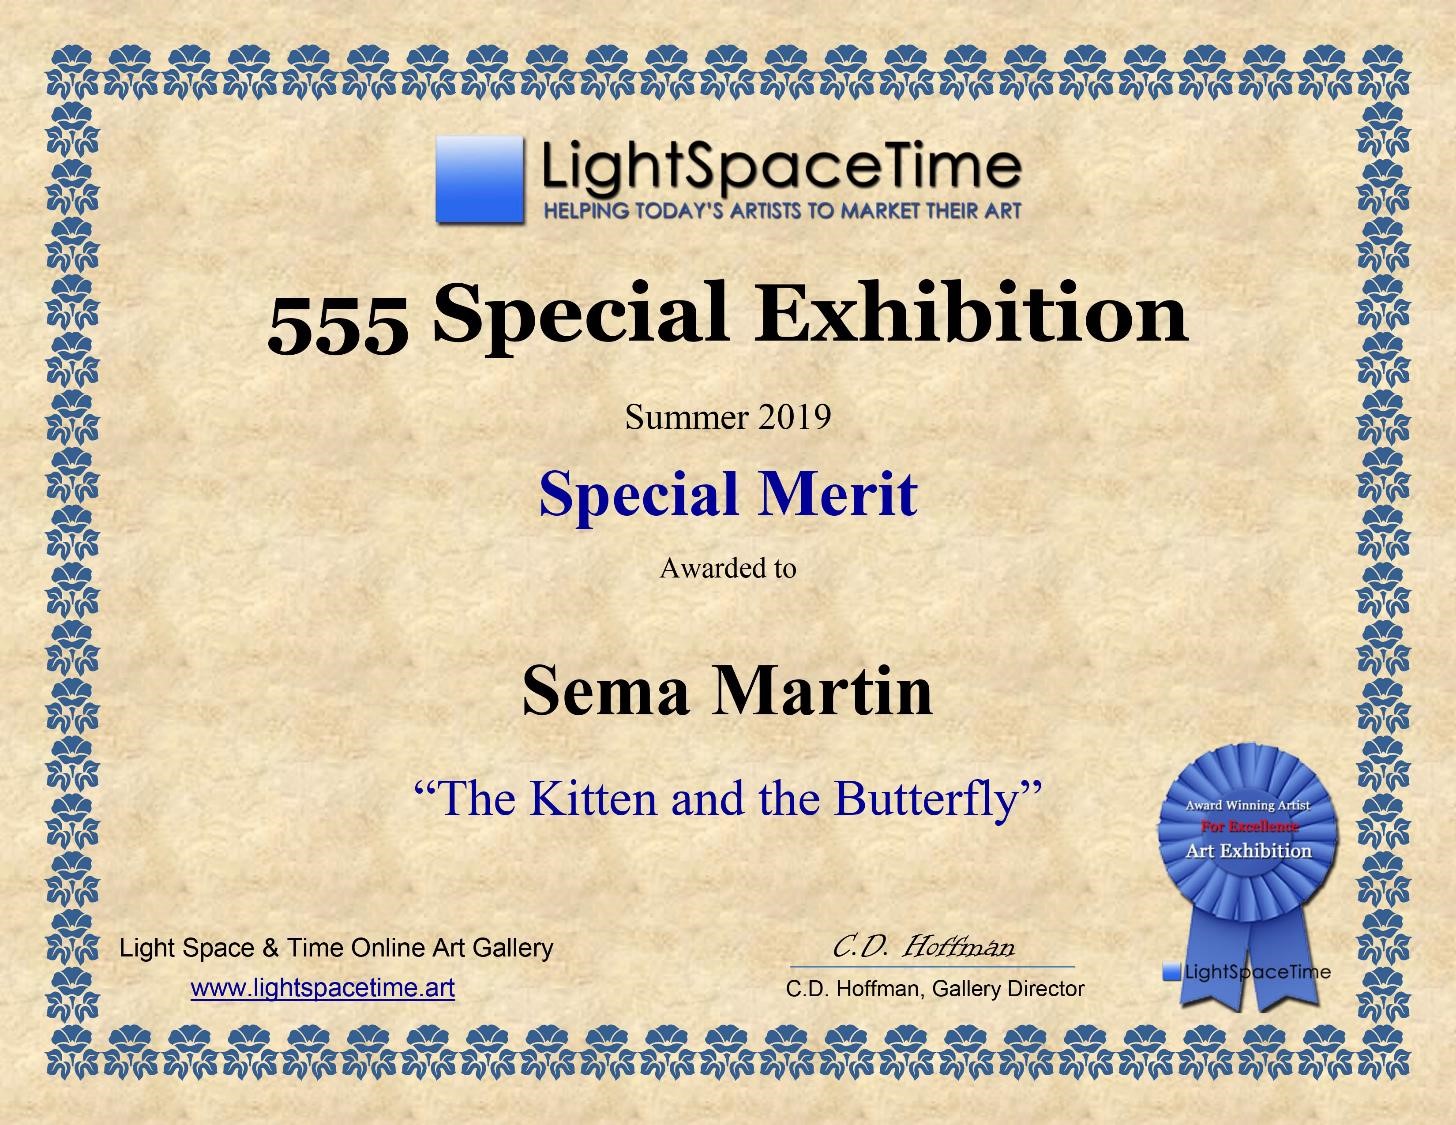 Copy of Light Space Time - 555 Special Exhibition summer 2019, Special Merit, Artist Sema Martin 'The Kitten and the Butterfly'